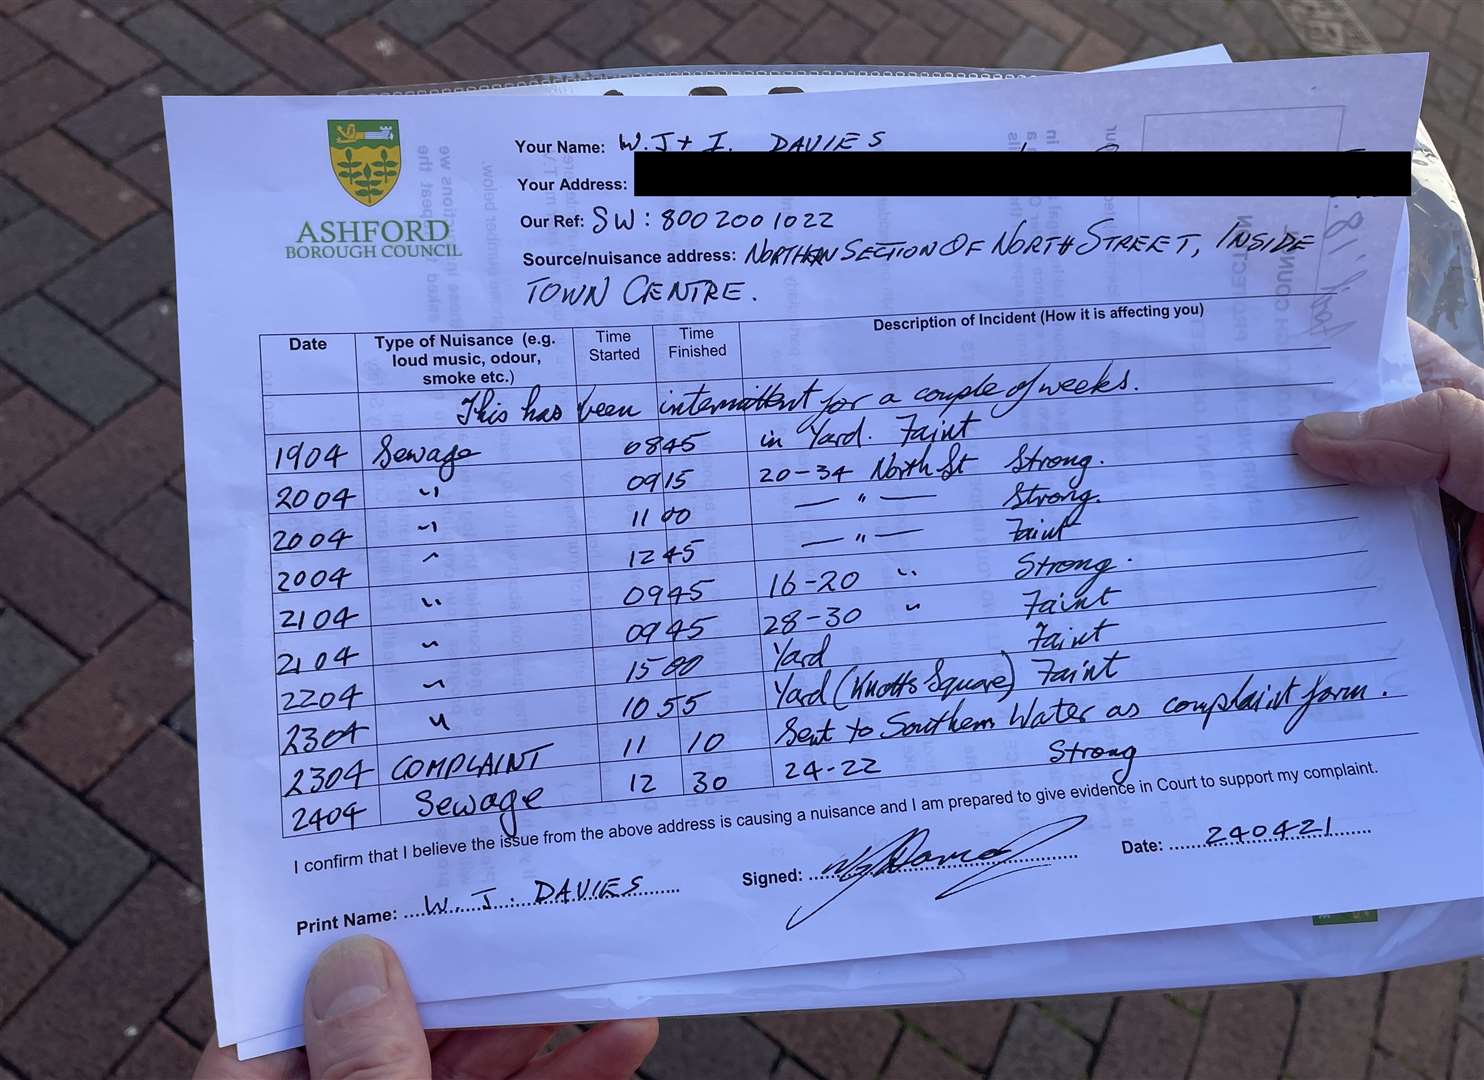 An incident log of smells dating back to April, alleging a complaint was filed on April 23